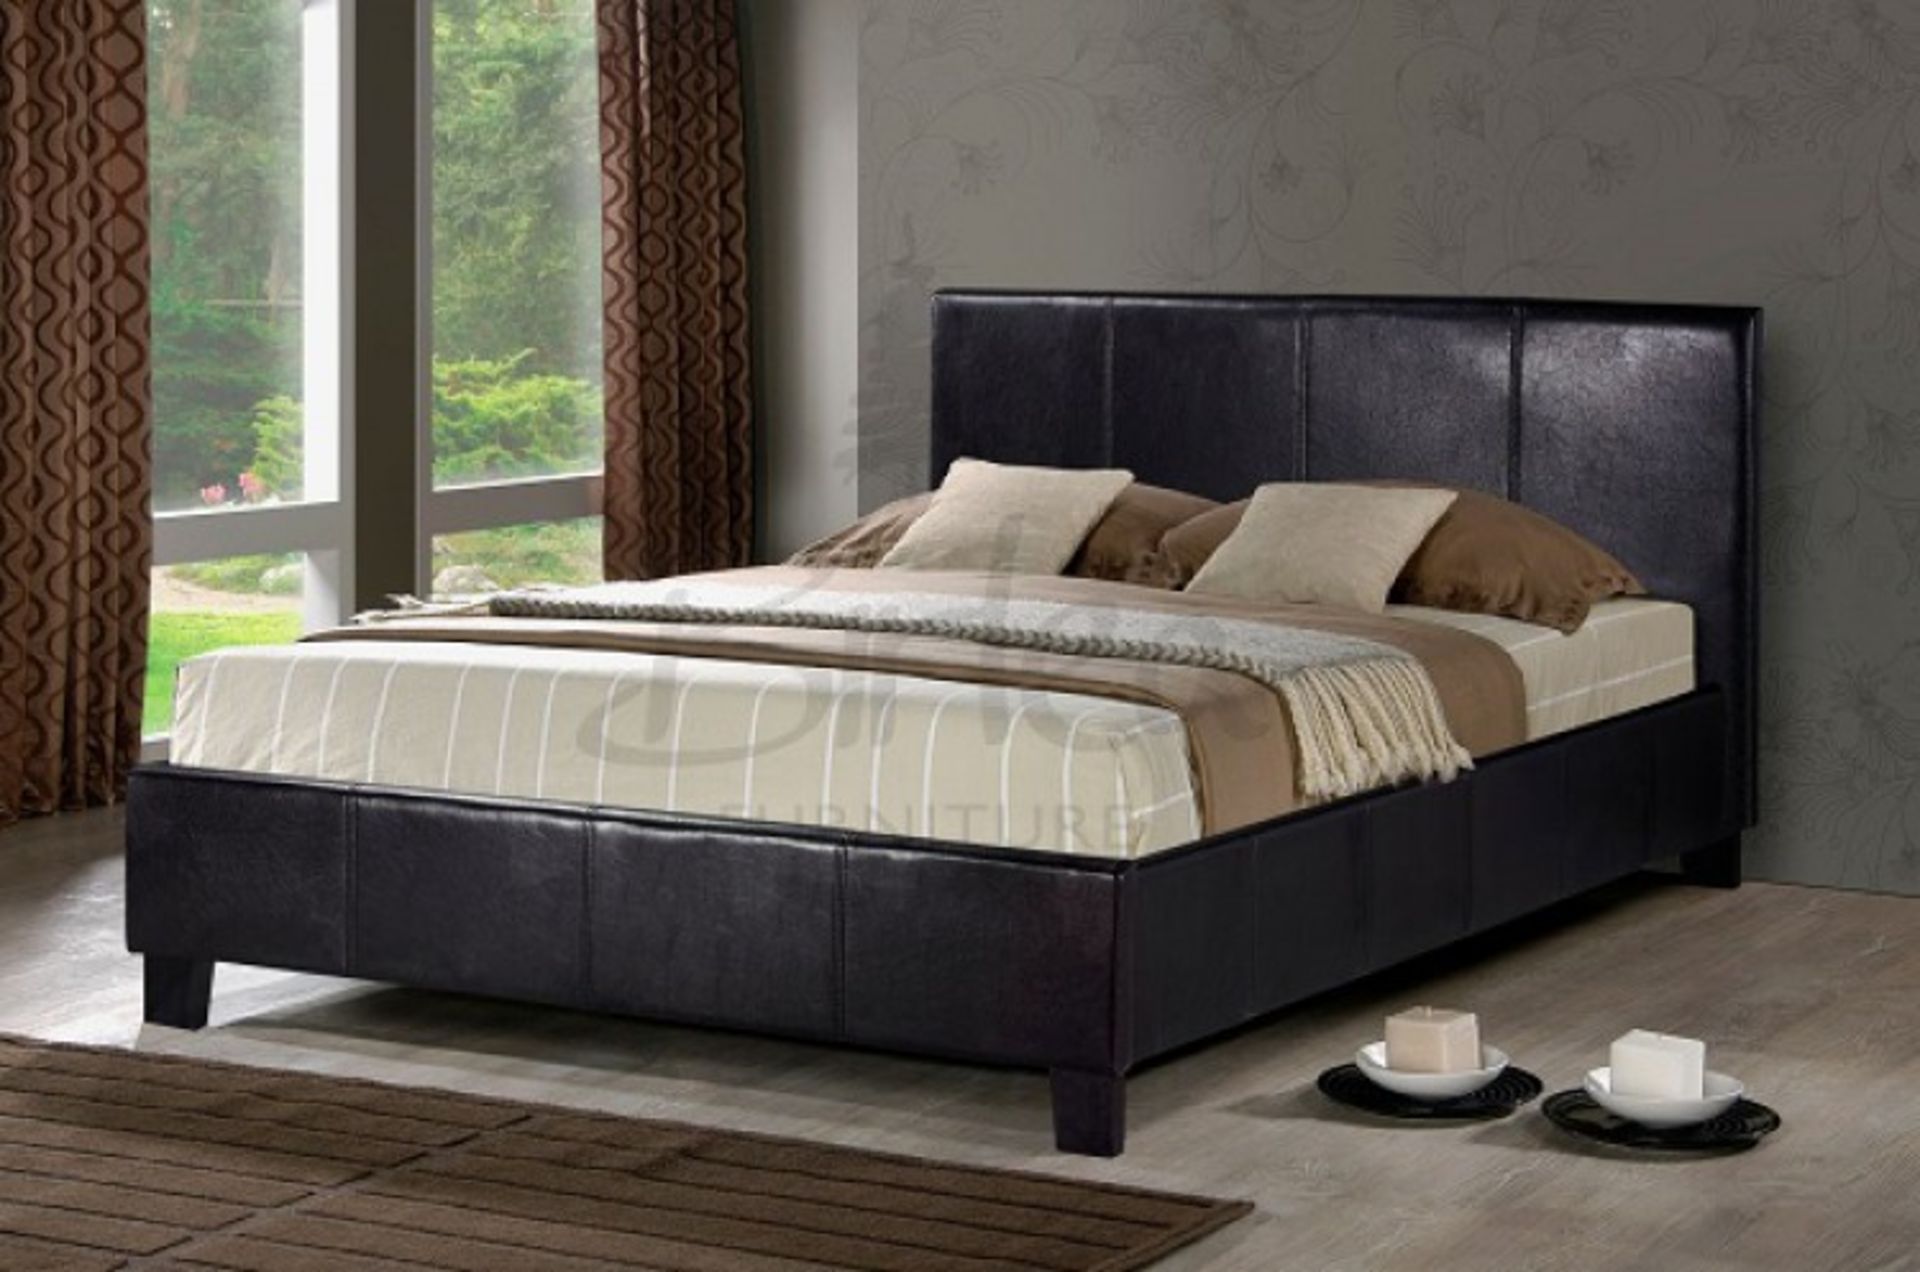 1 BRAND NEW BOXED BIRLEA BERLIN BROWN FAUX LEATHER 4FT SMALL DOUBLE OTTOMAN BED RRP £179.99